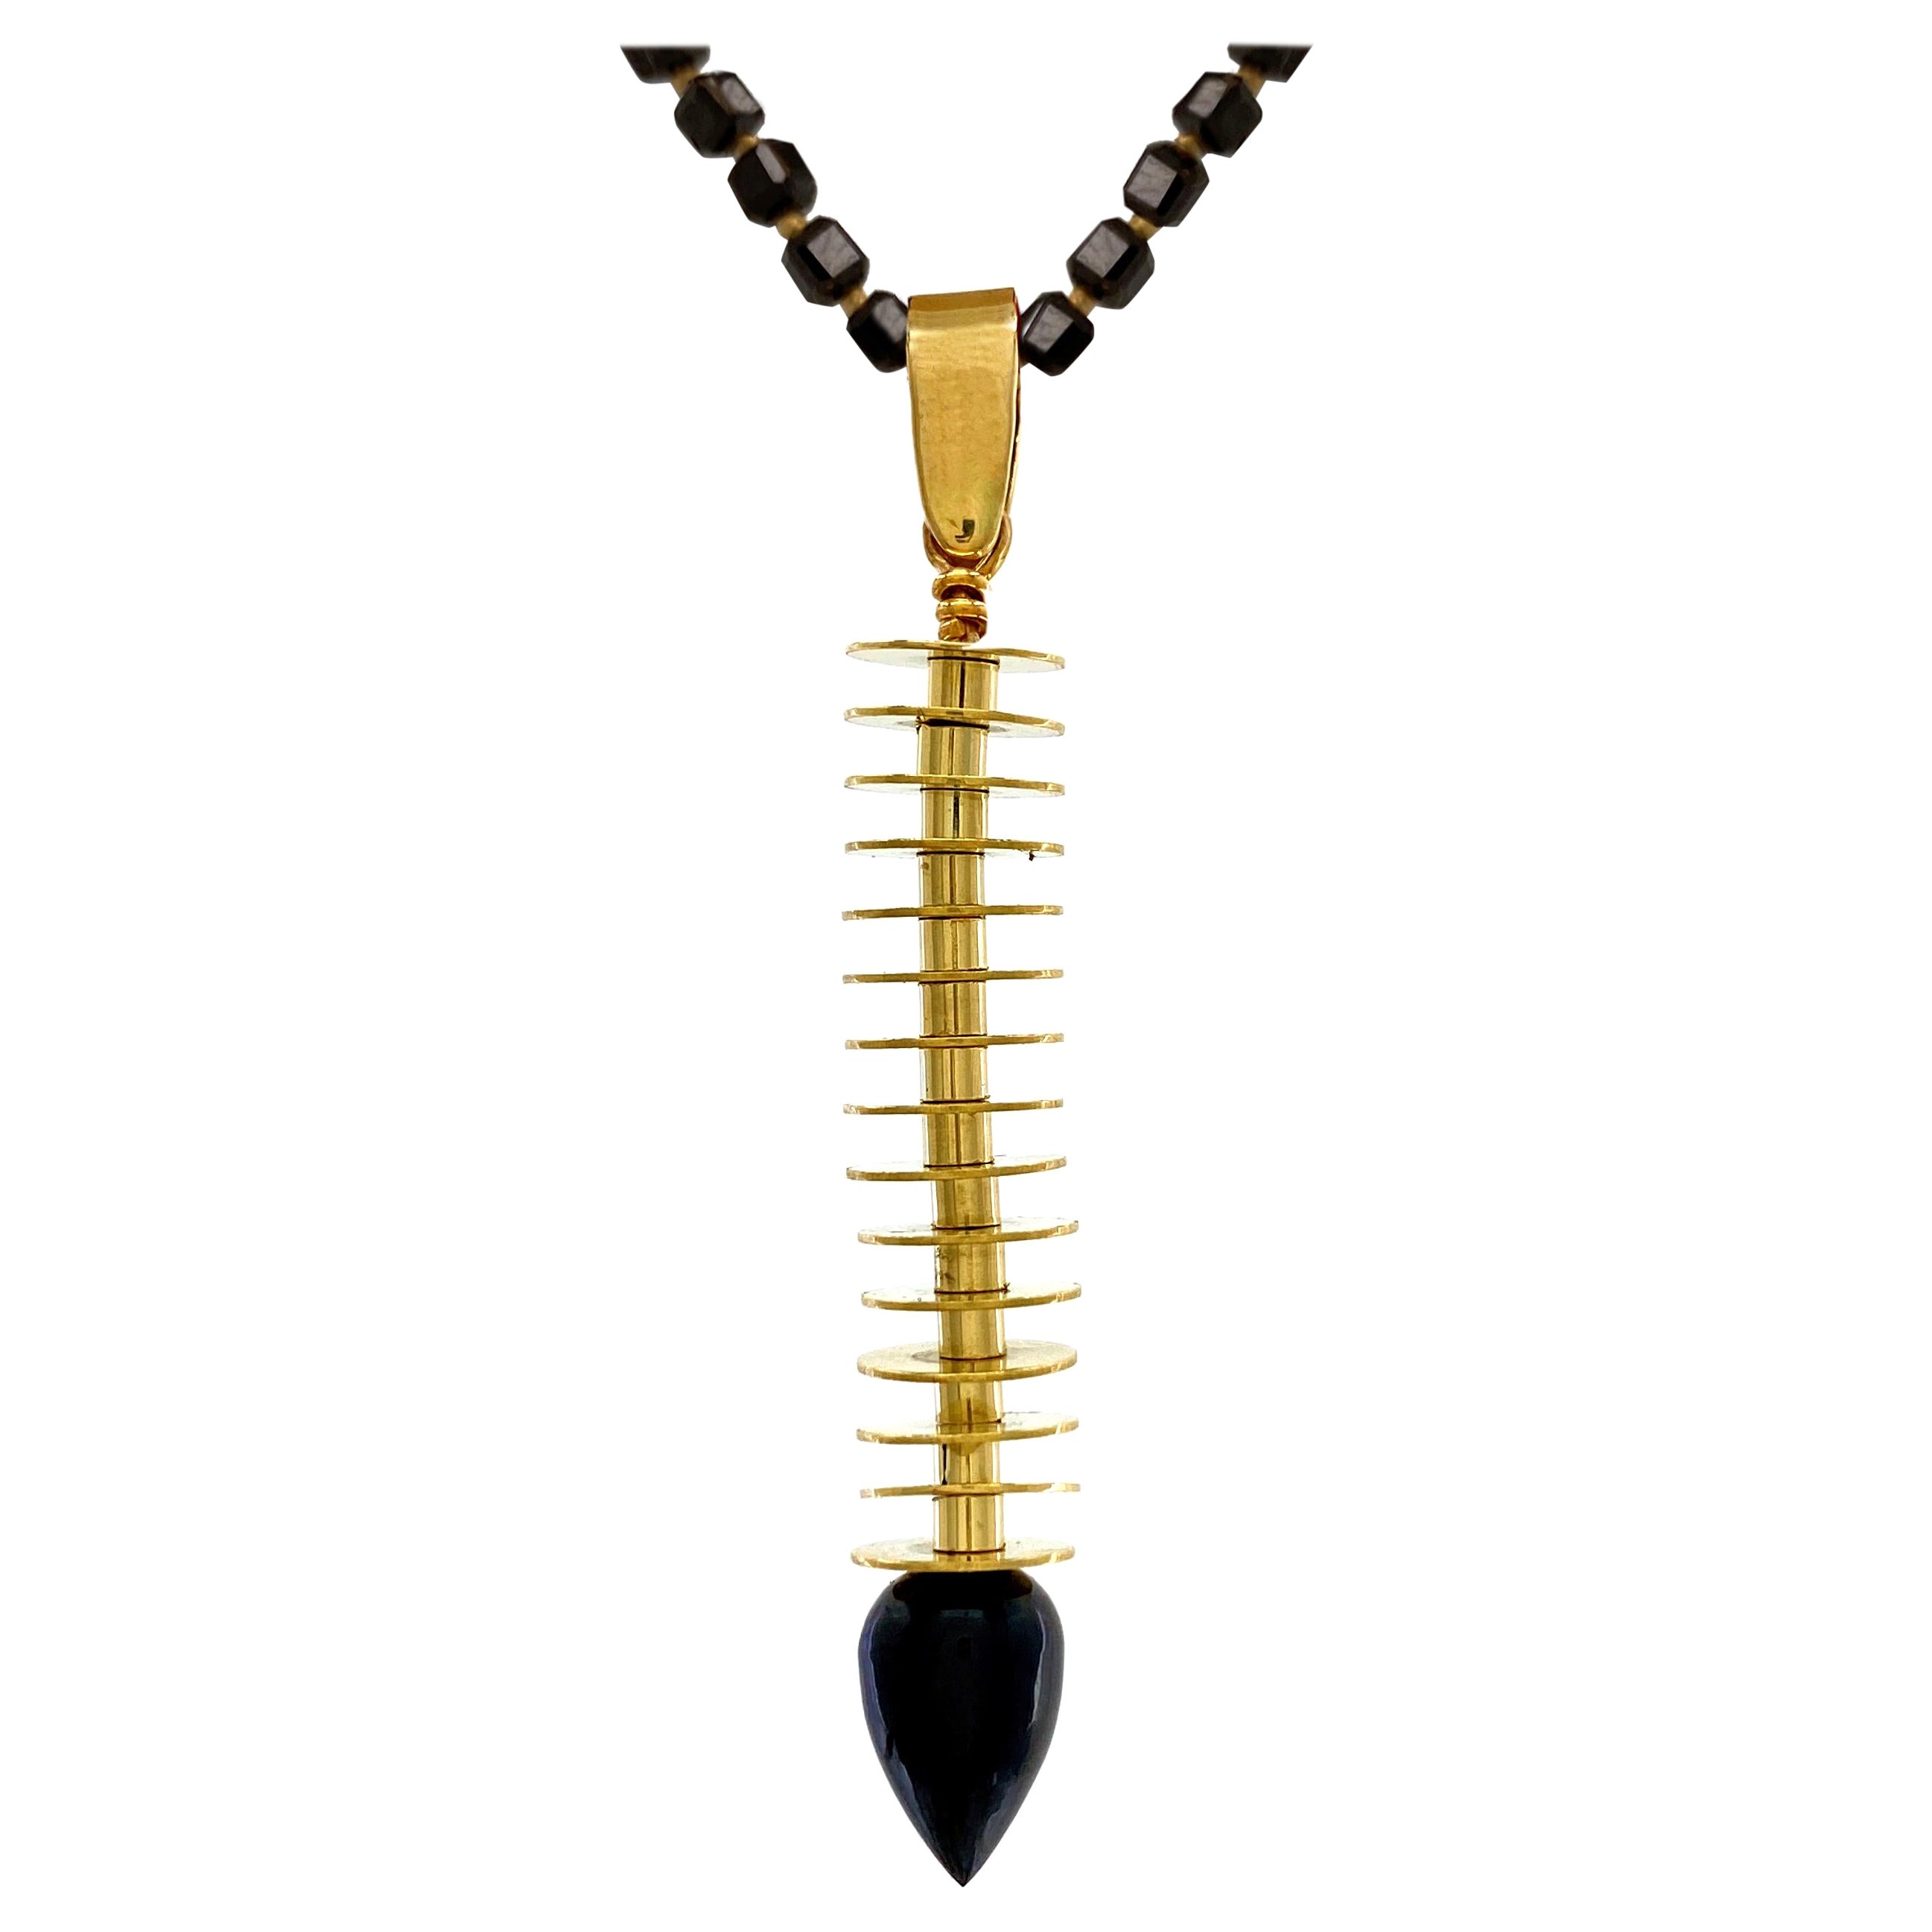 "Spinal Spinel" Pendant in 18K Gold with Black Spinel Drop & Beaded Necklace